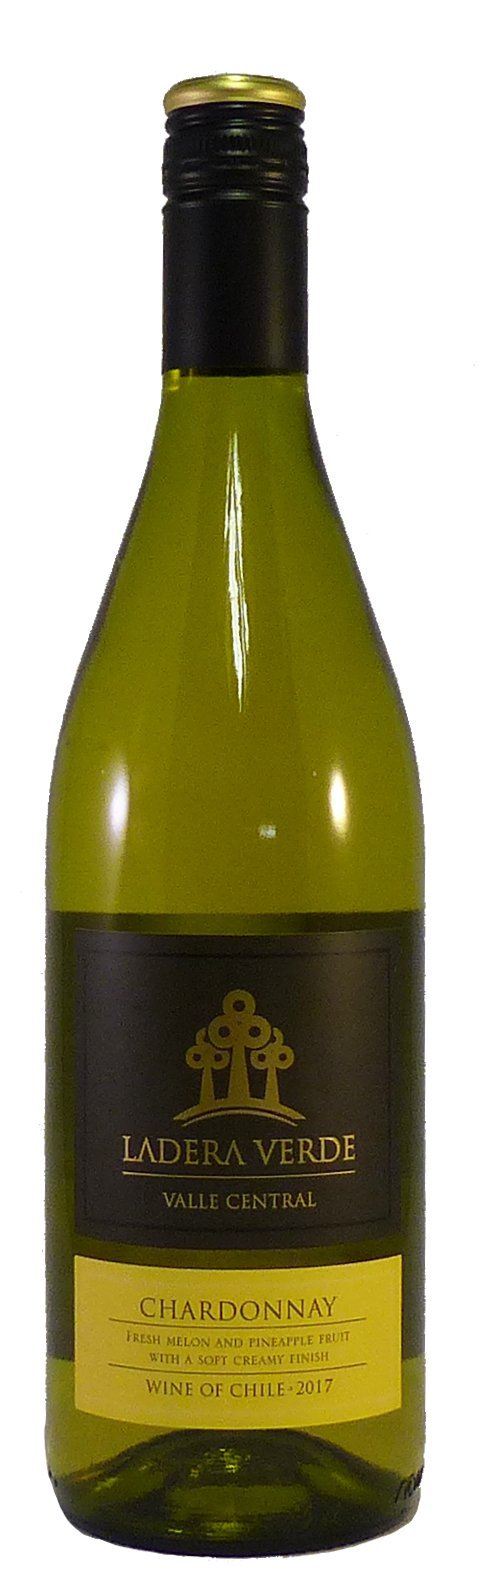 Ladera Verde Chardonnay, Central Valley, Chile